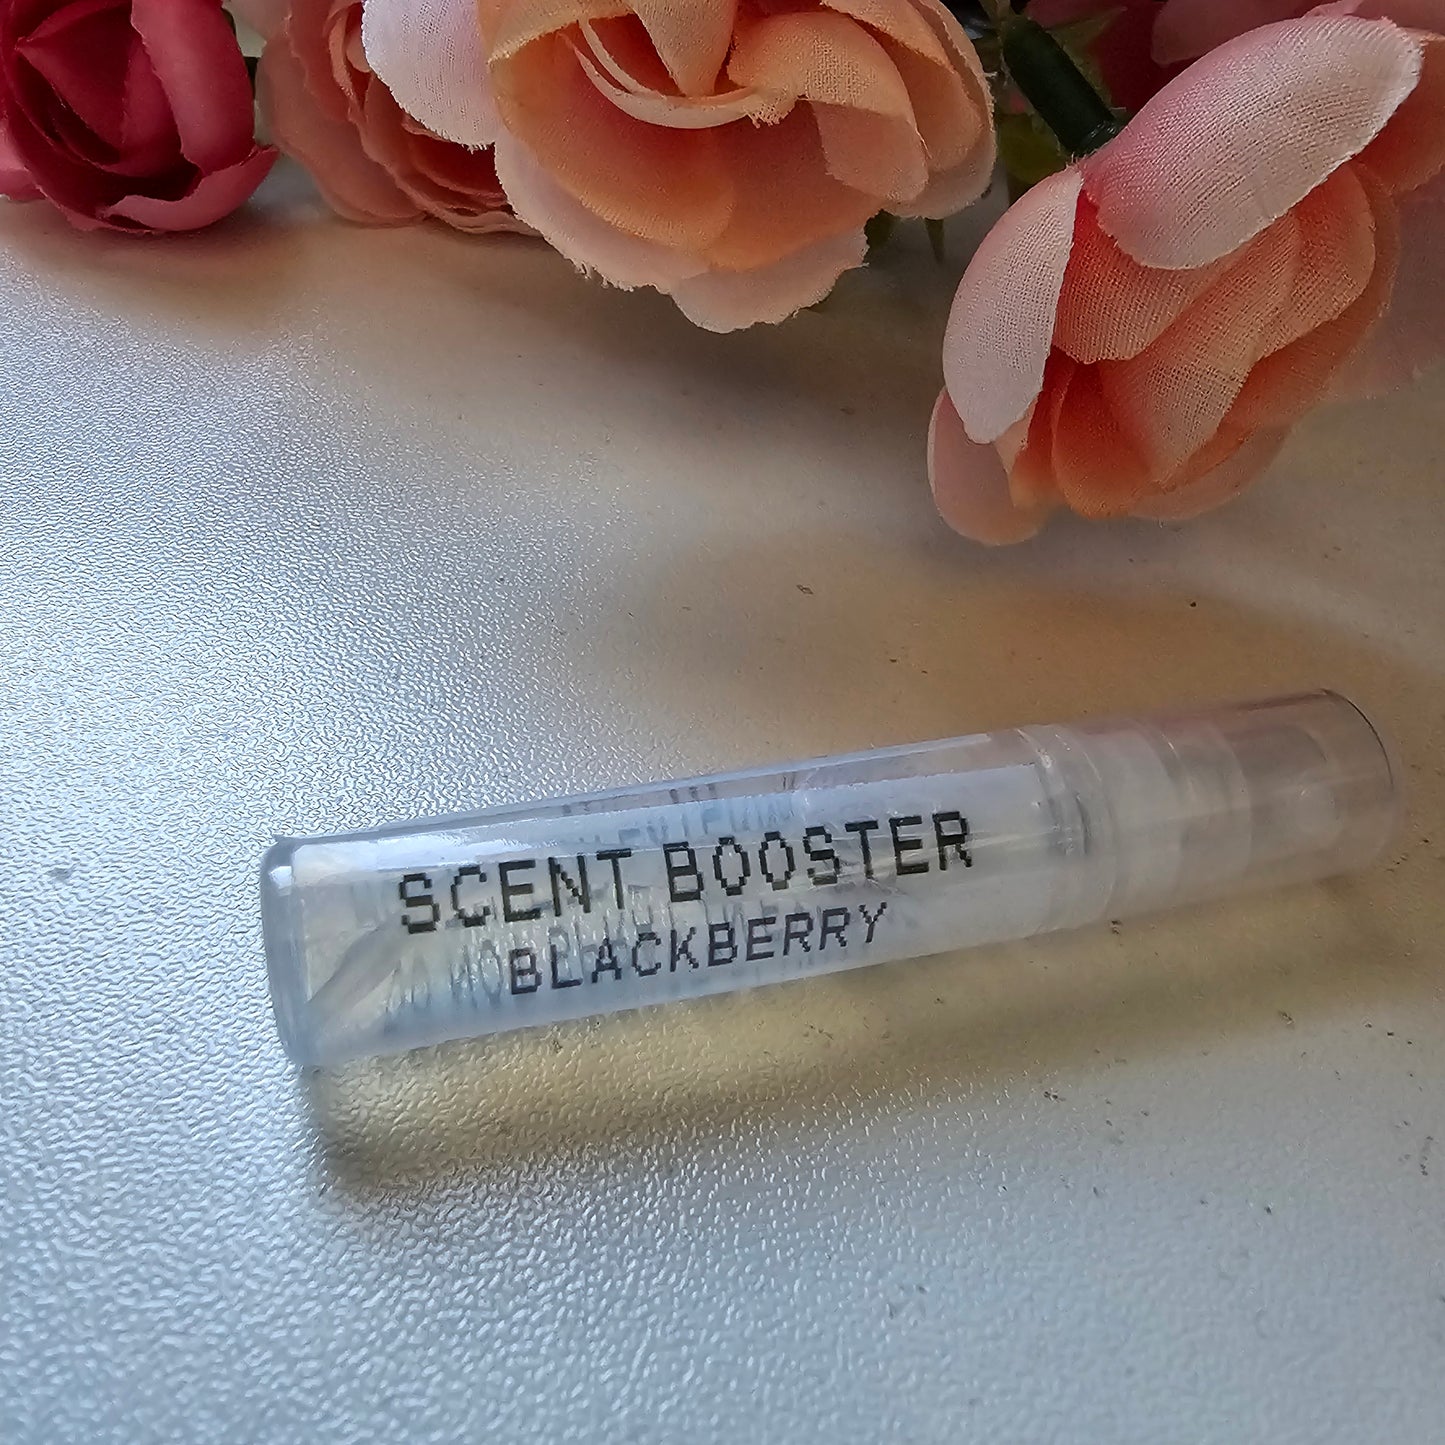 Scent Boosters